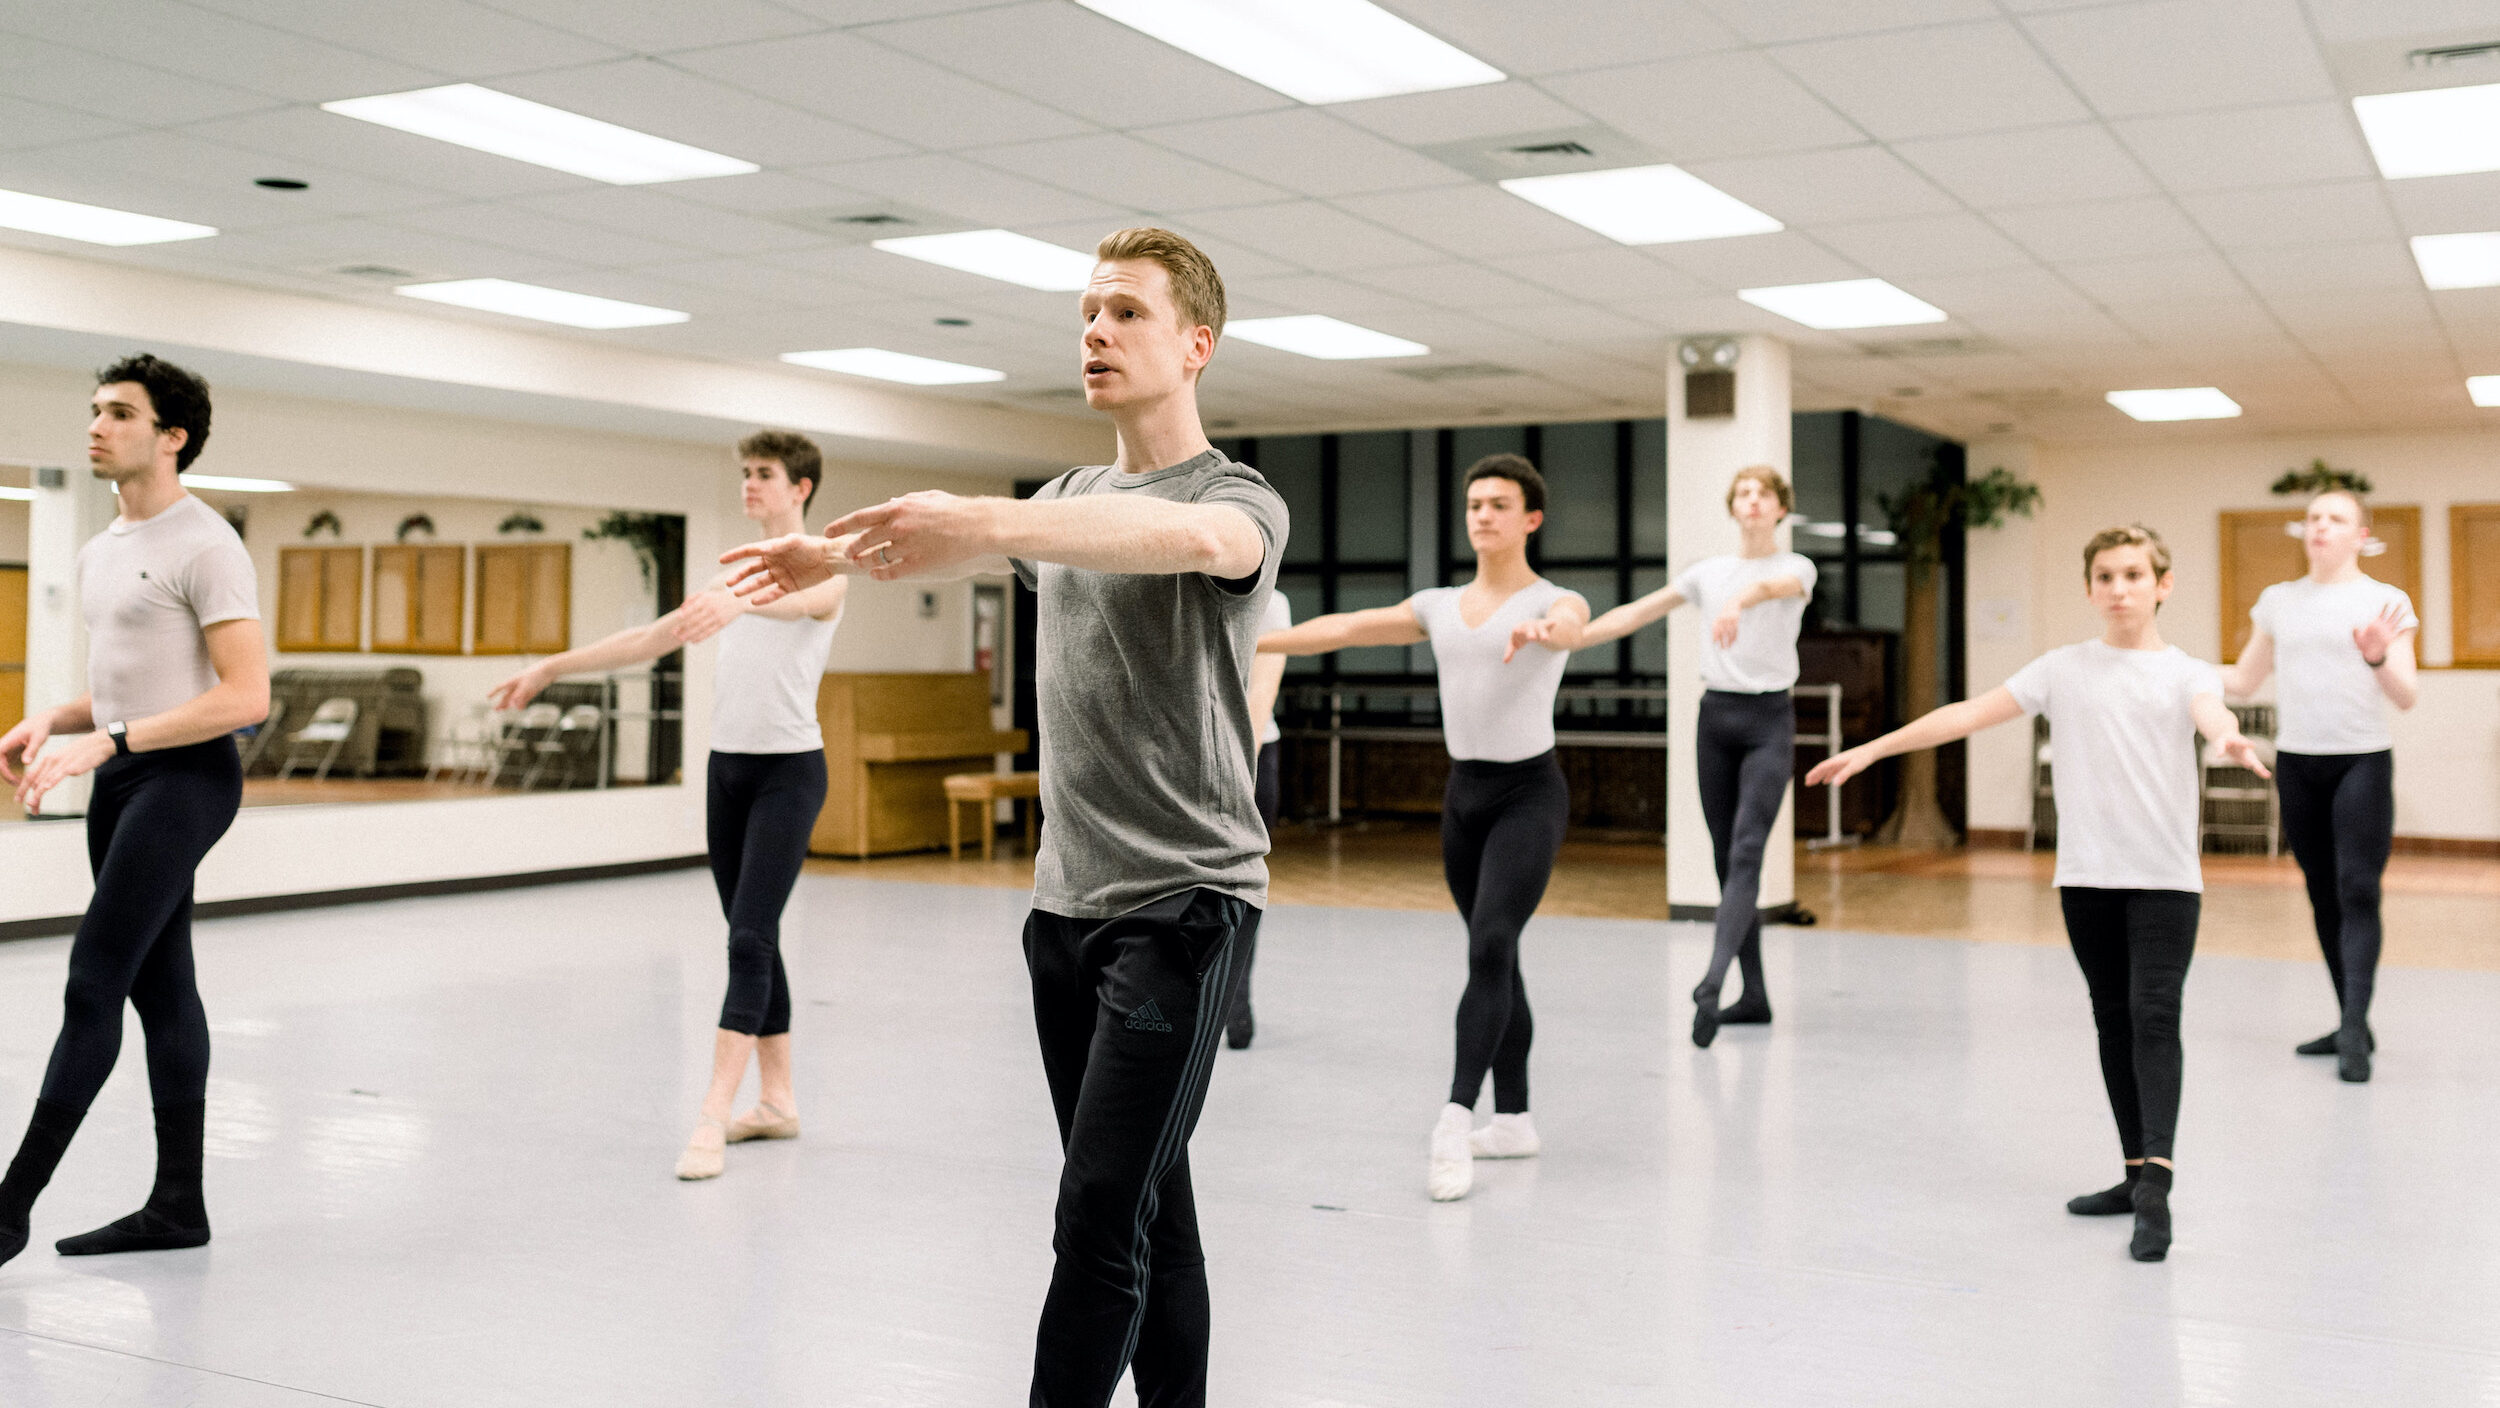 A male ballet teacher stands at the front of a dance studio in tendu à la quatrieme devant with his left leg. He wears a gray t-shirt and black track pants. Behind him, seven teenage boys in white t-shirts, black tights and black ballet slippers practice the same move.